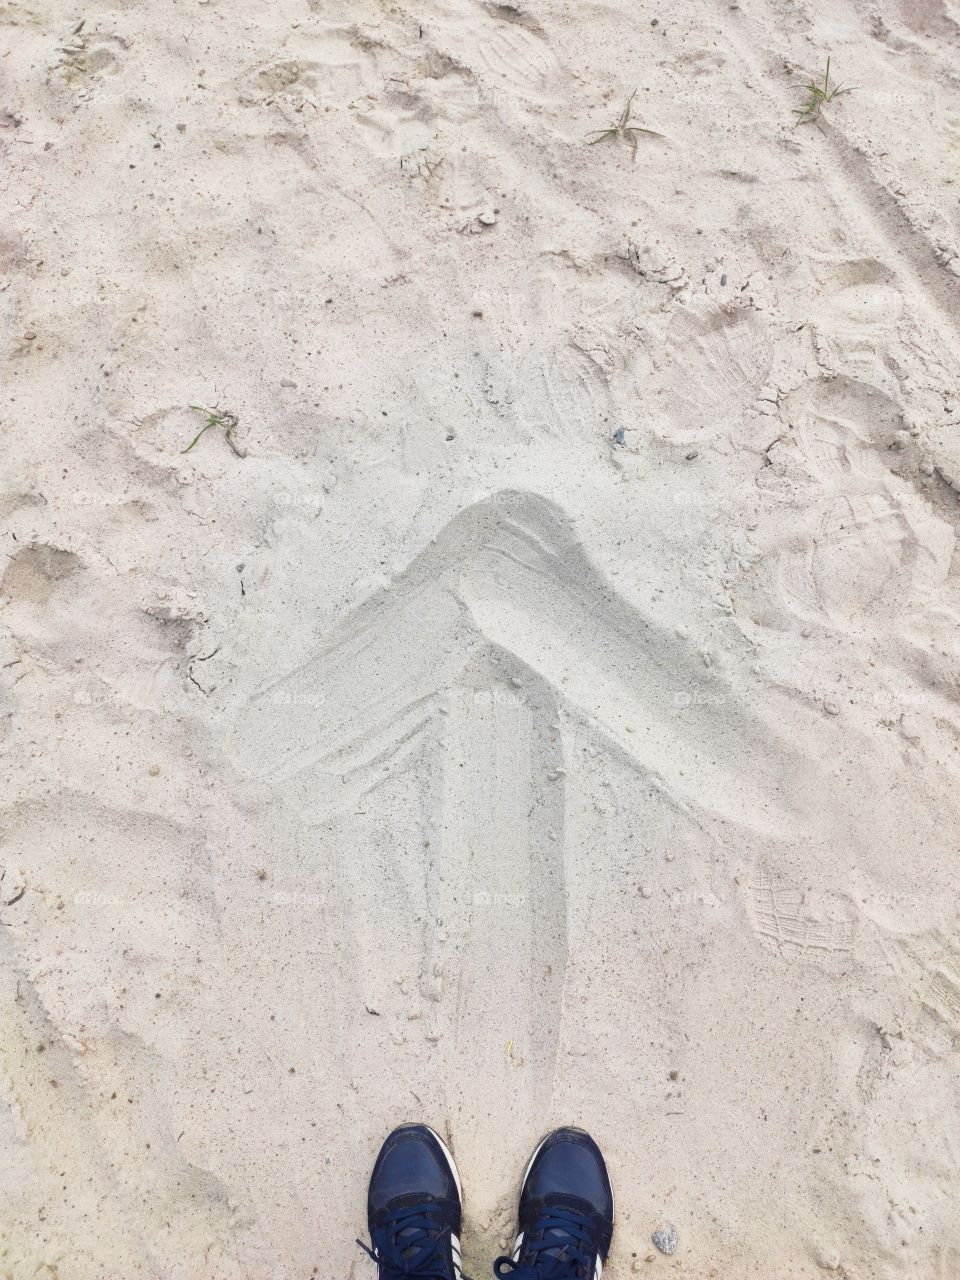 On the beach are a pair of sneakers and a drawn arrow on the sand